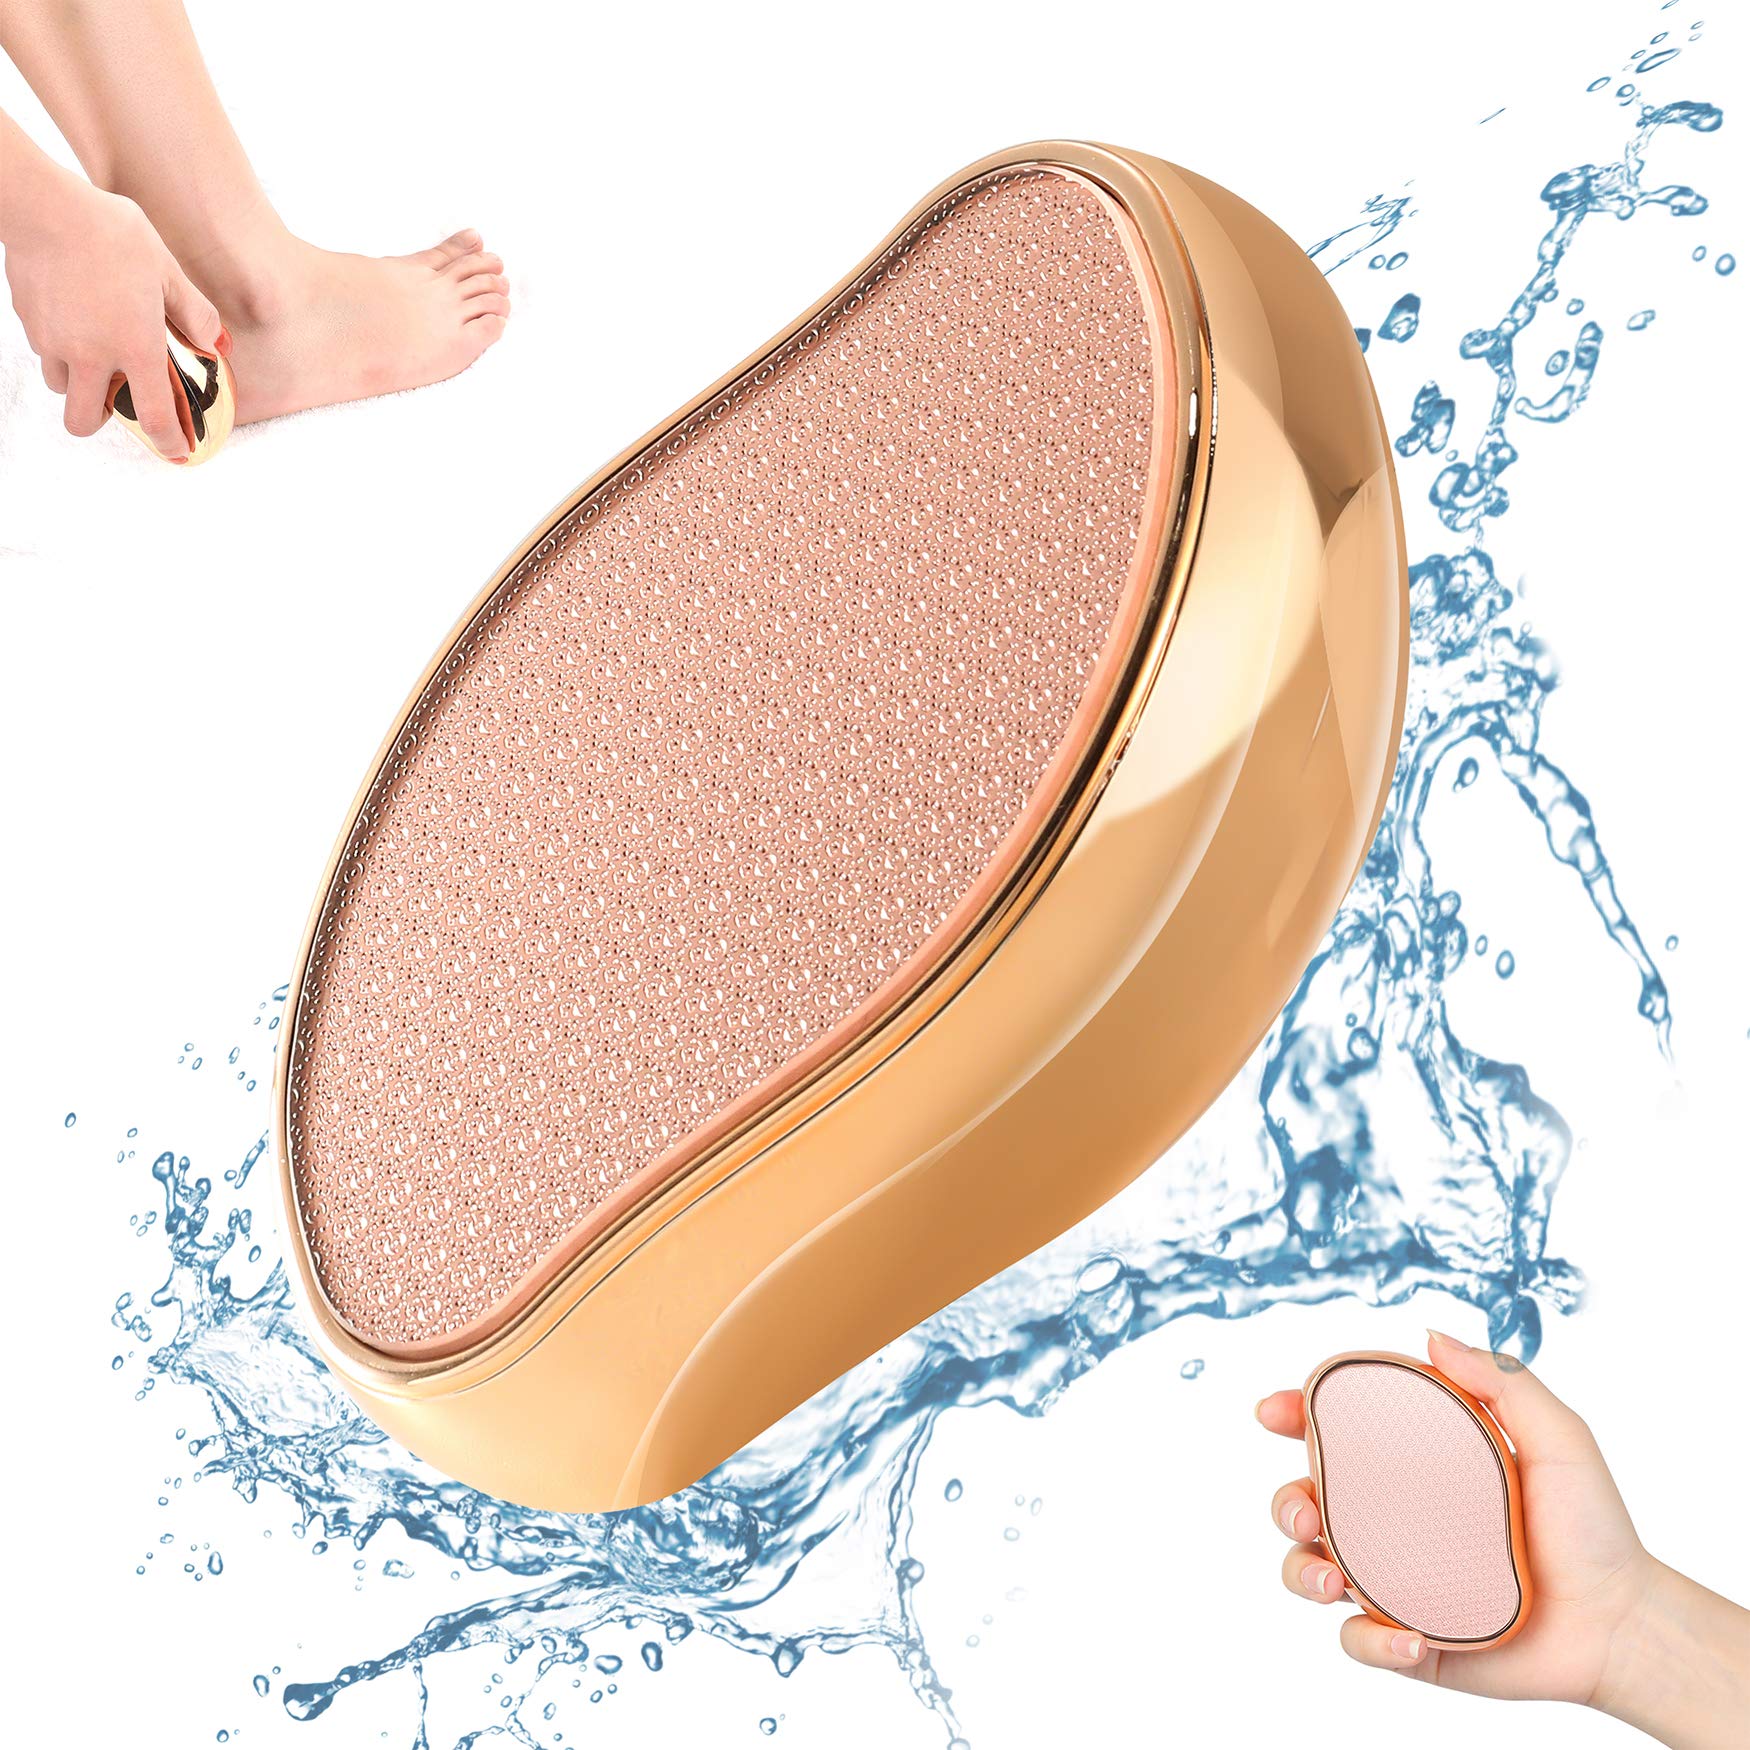 BEZOX 2in1 Nano Glass Foot File For Foot Spa, Home Salon -Highly Effective Callus Remover Wake Up Velvety Feet -High-Density Fine Nano Glass Not Hurt Your Feet, Crystal Foot File For Travel Use